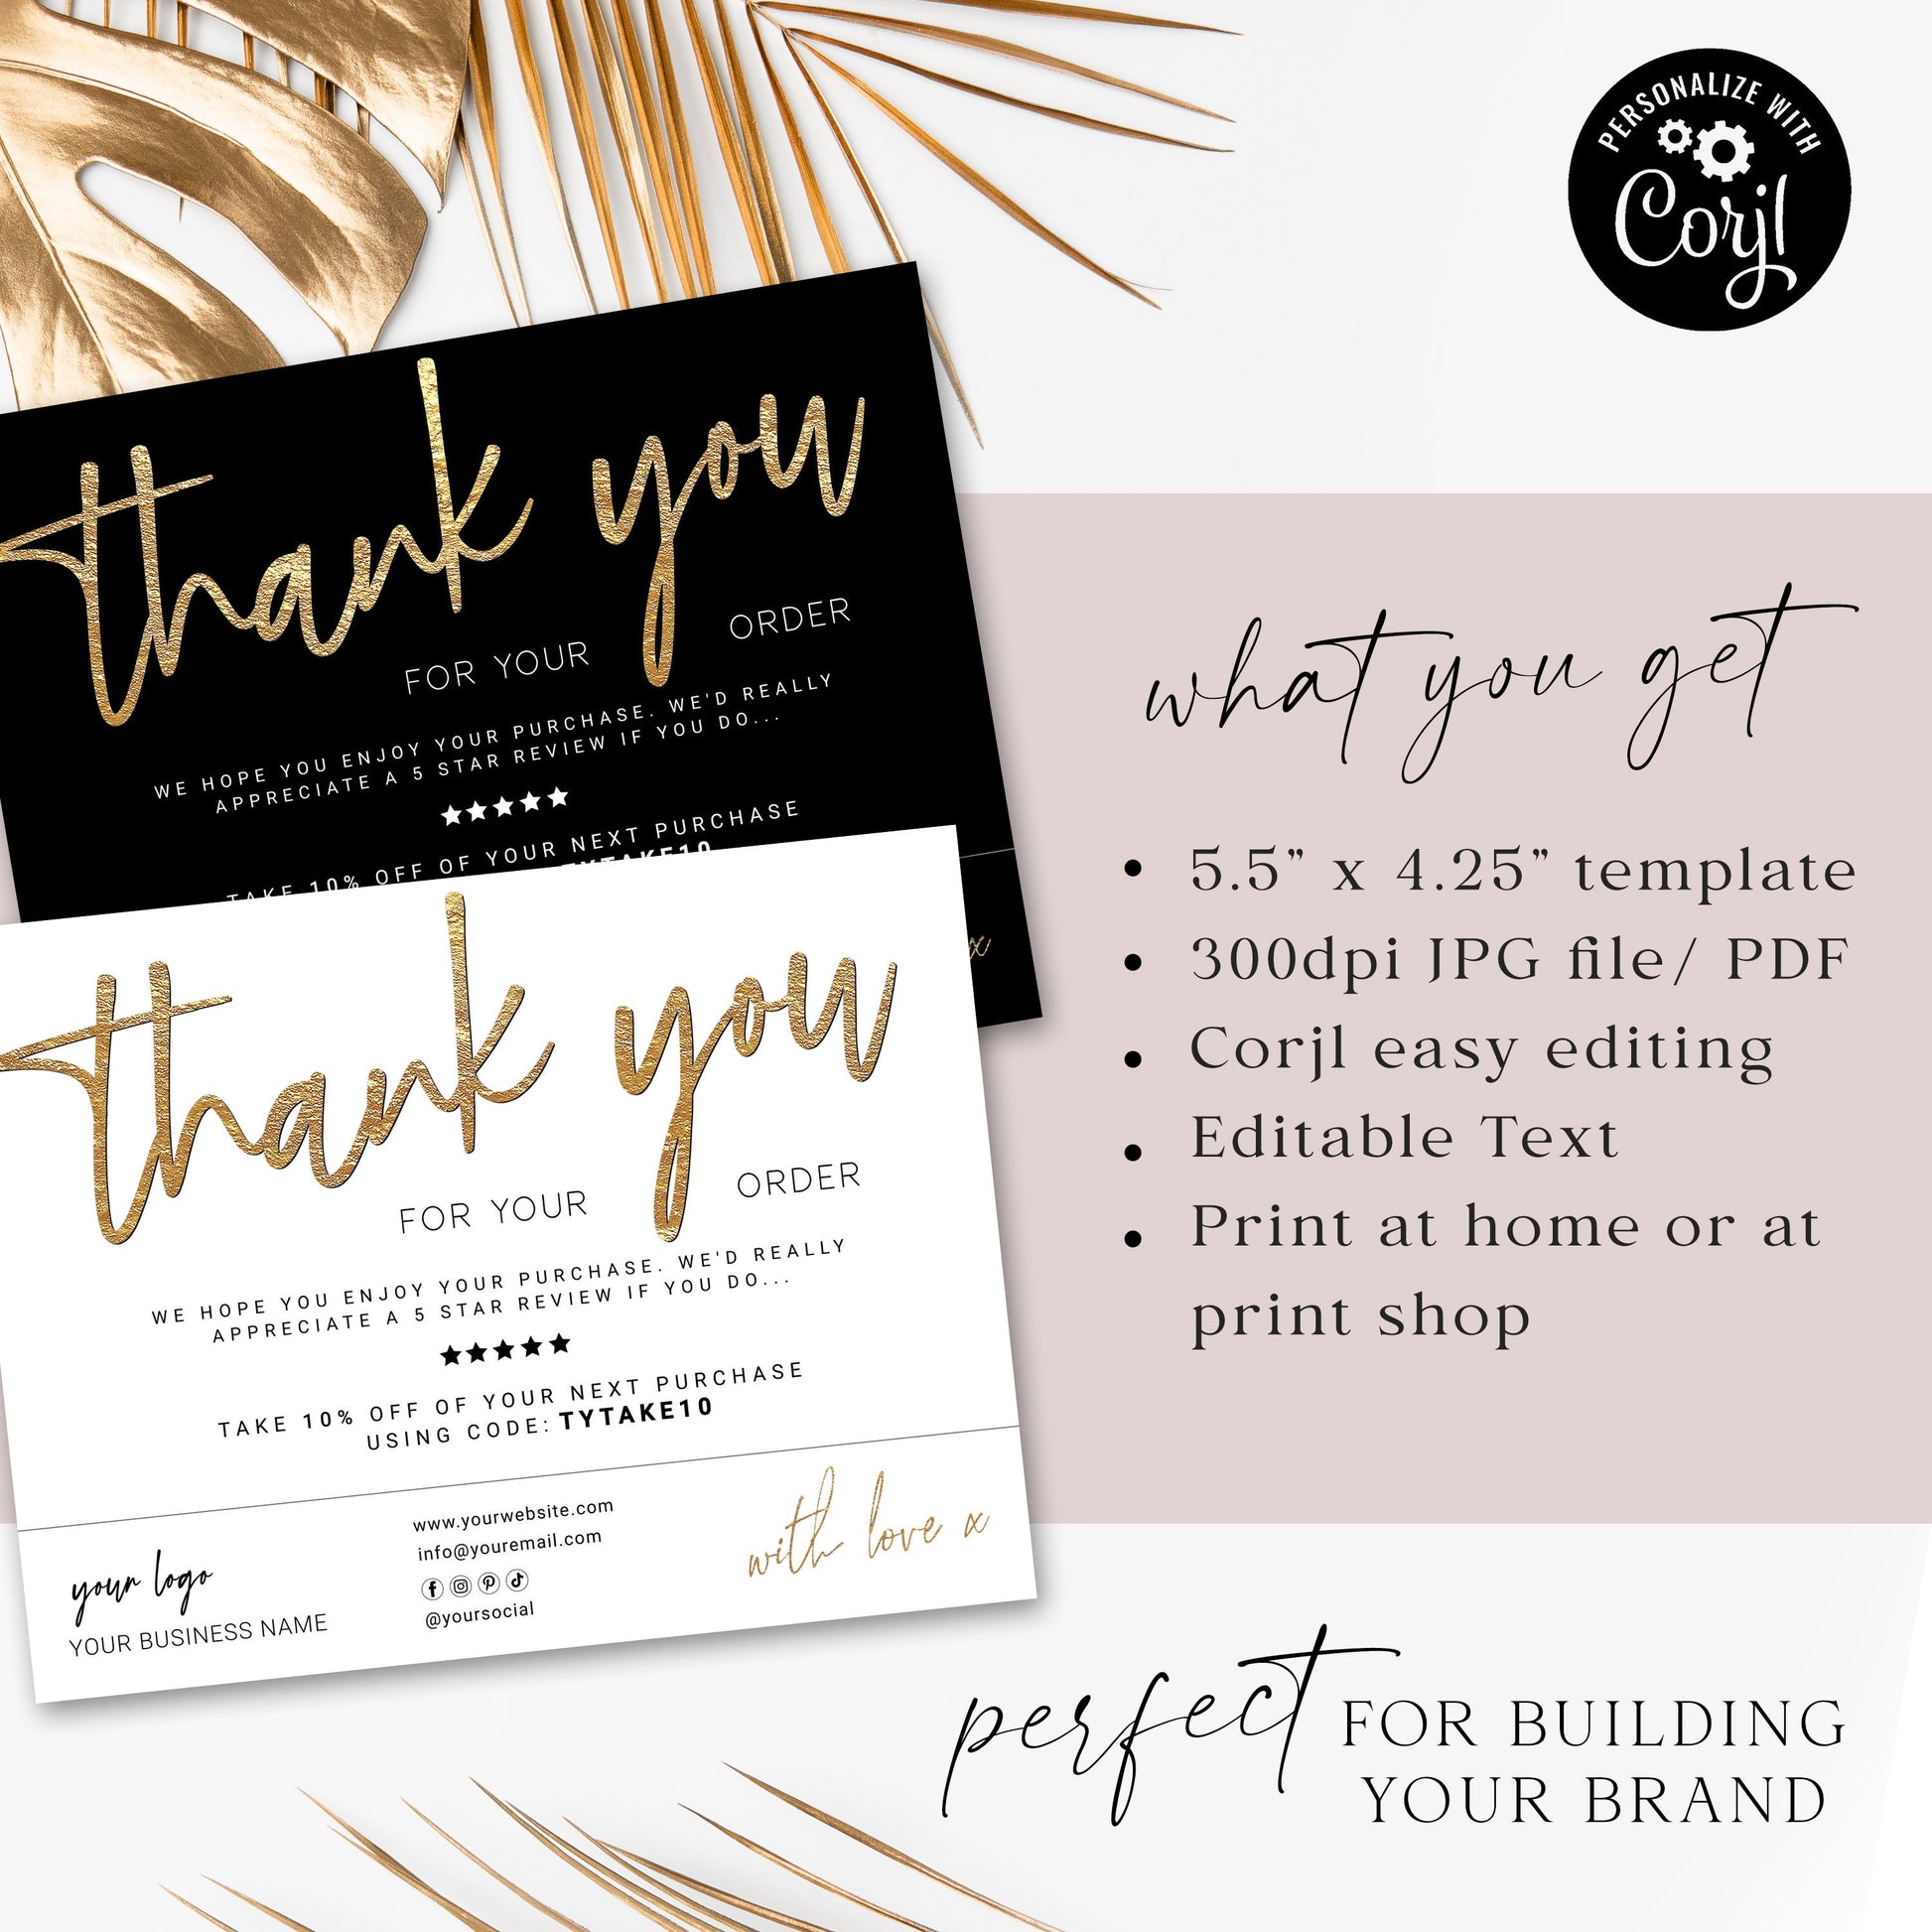 Editable Thank You Card Template, DIY Edit Thank You For Your Business Card, Black Gold Marble, Premade Etsy Customer Thank you Note MY-001